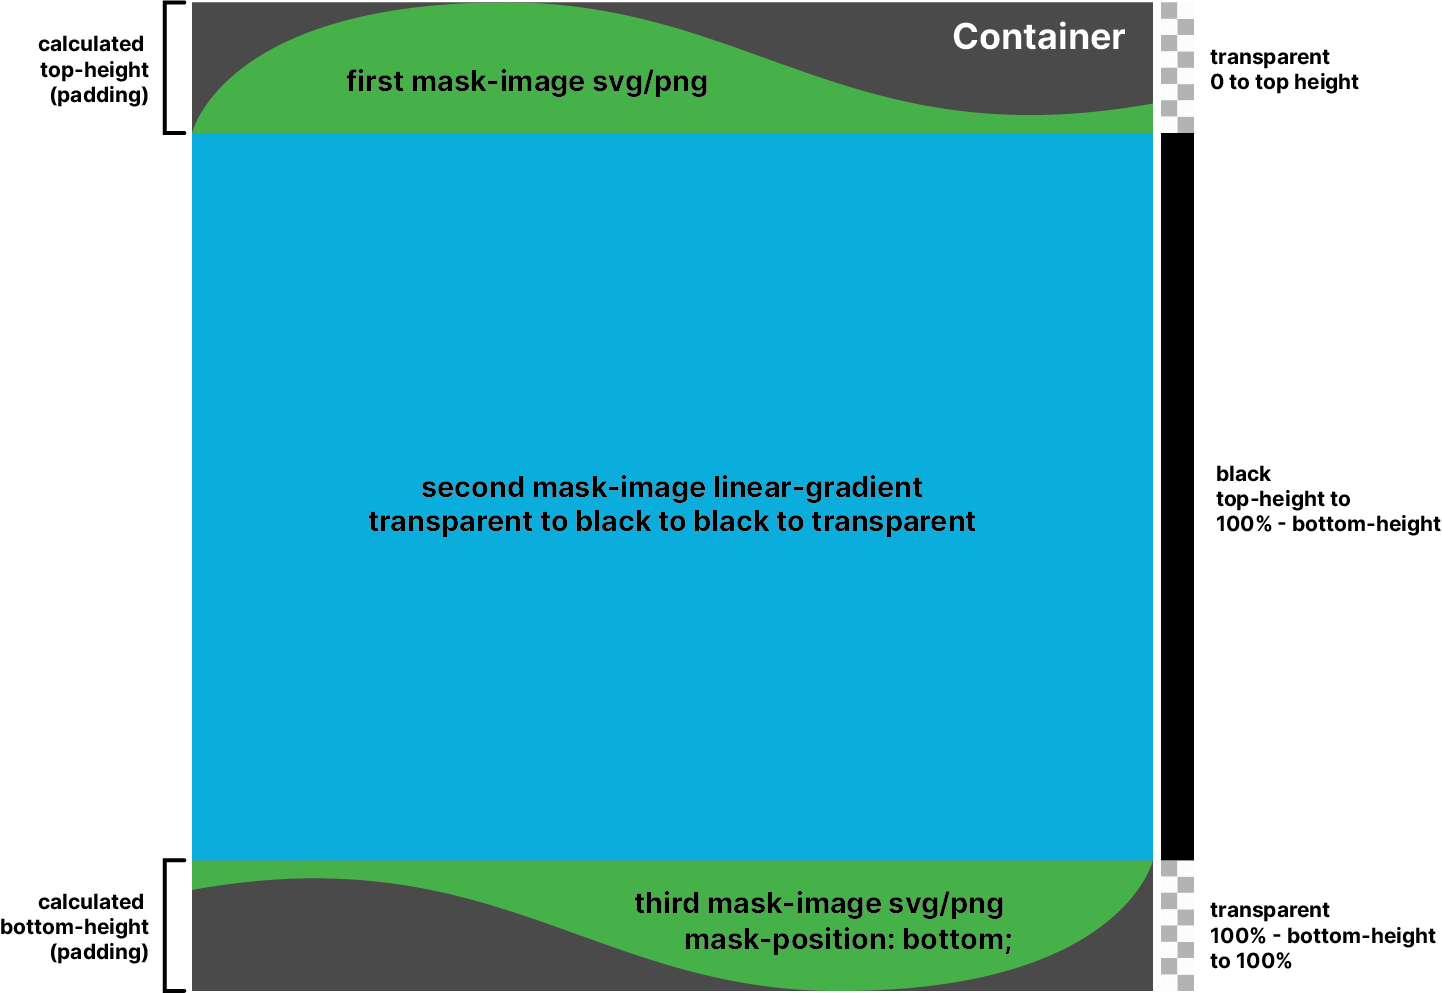 A visual representation of the masking concept described above.